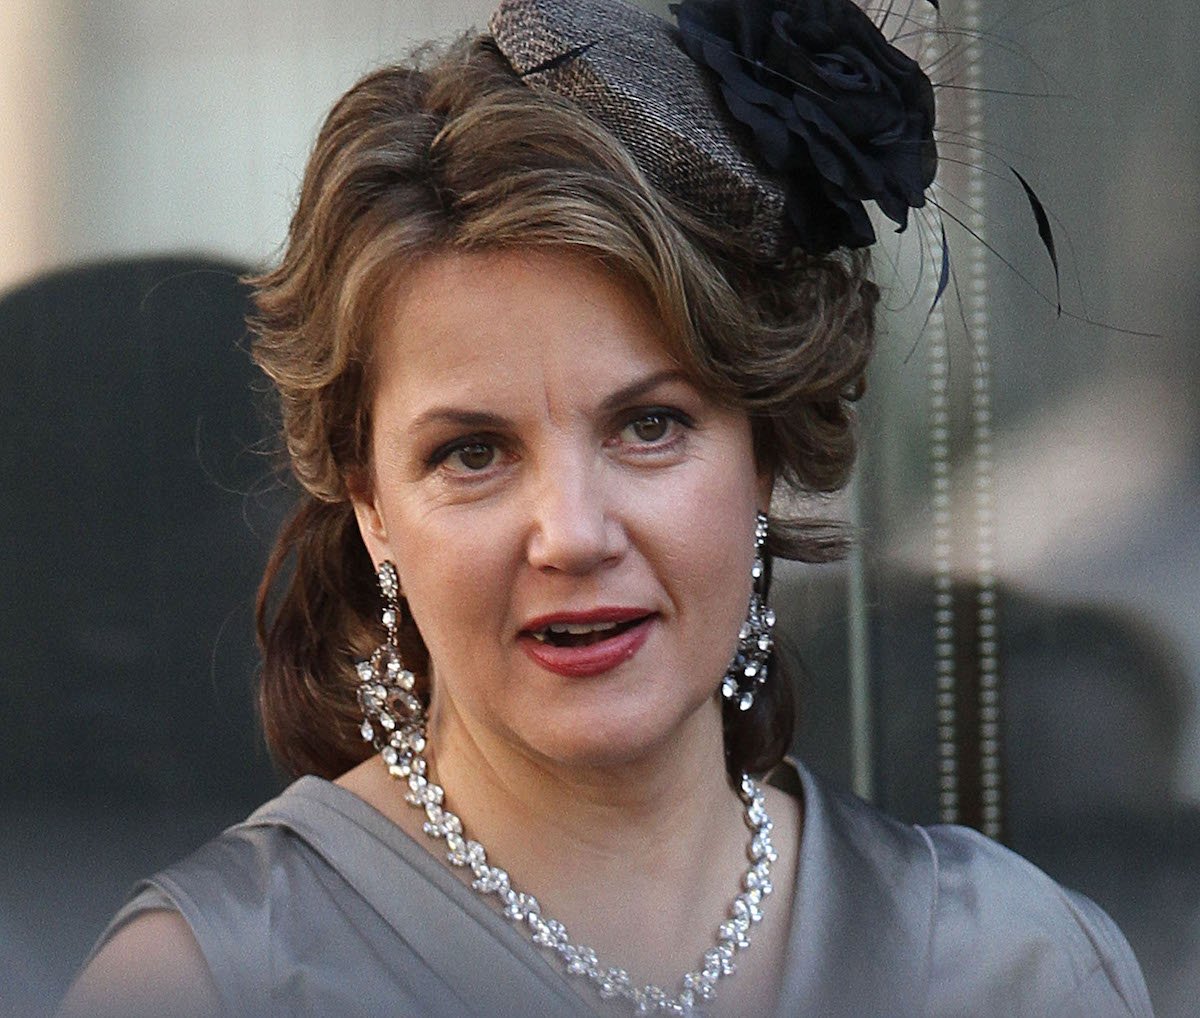 Margaret Colin has her hair up and makeup done to film 'Gossip Girl'. She wears pearls and dangling earrings. 